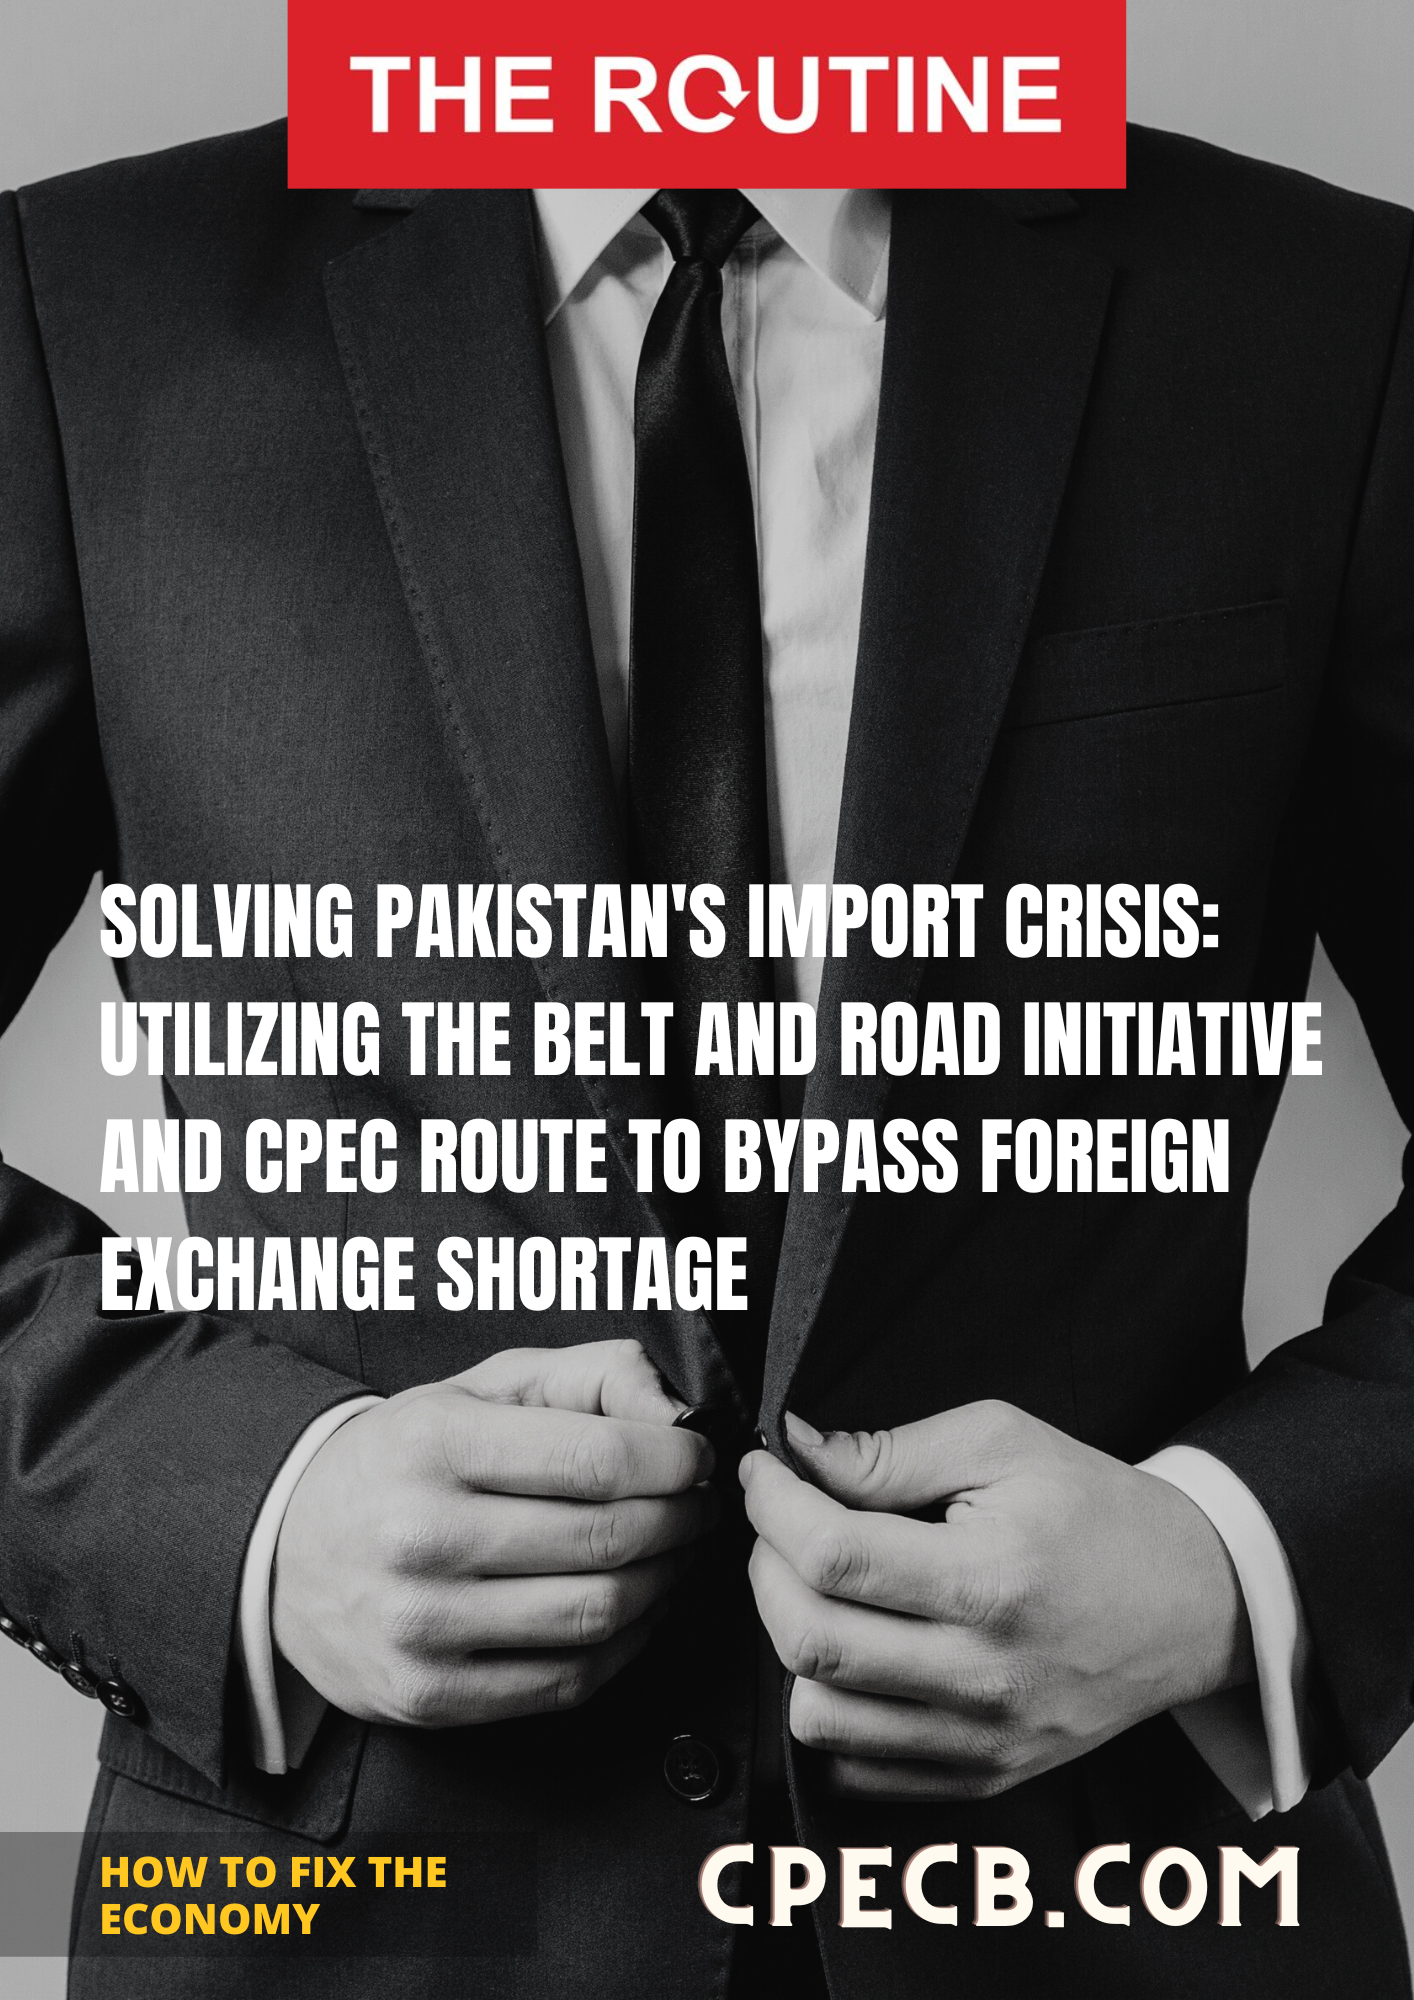 Solving Pakistan's Import Crisis Utilizing the Belt and Road Initiative and CPEC Route to Bypass Foreign Exchange Shortage